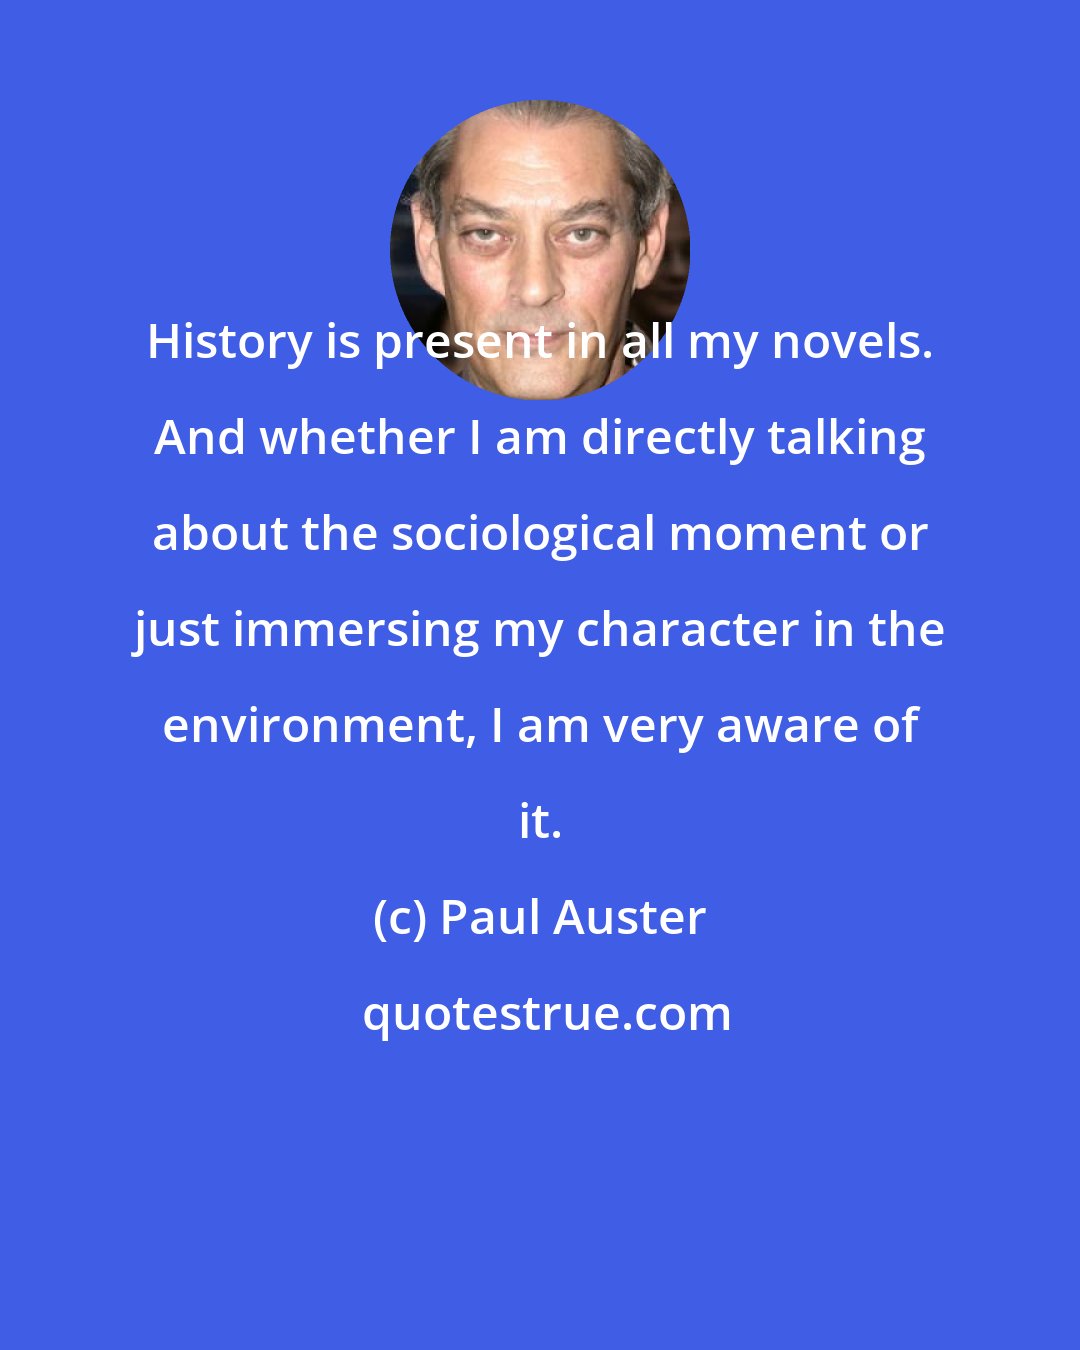 Paul Auster: History is present in all my novels. And whether I am directly talking about the sociological moment or just immersing my character in the environment, I am very aware of it.